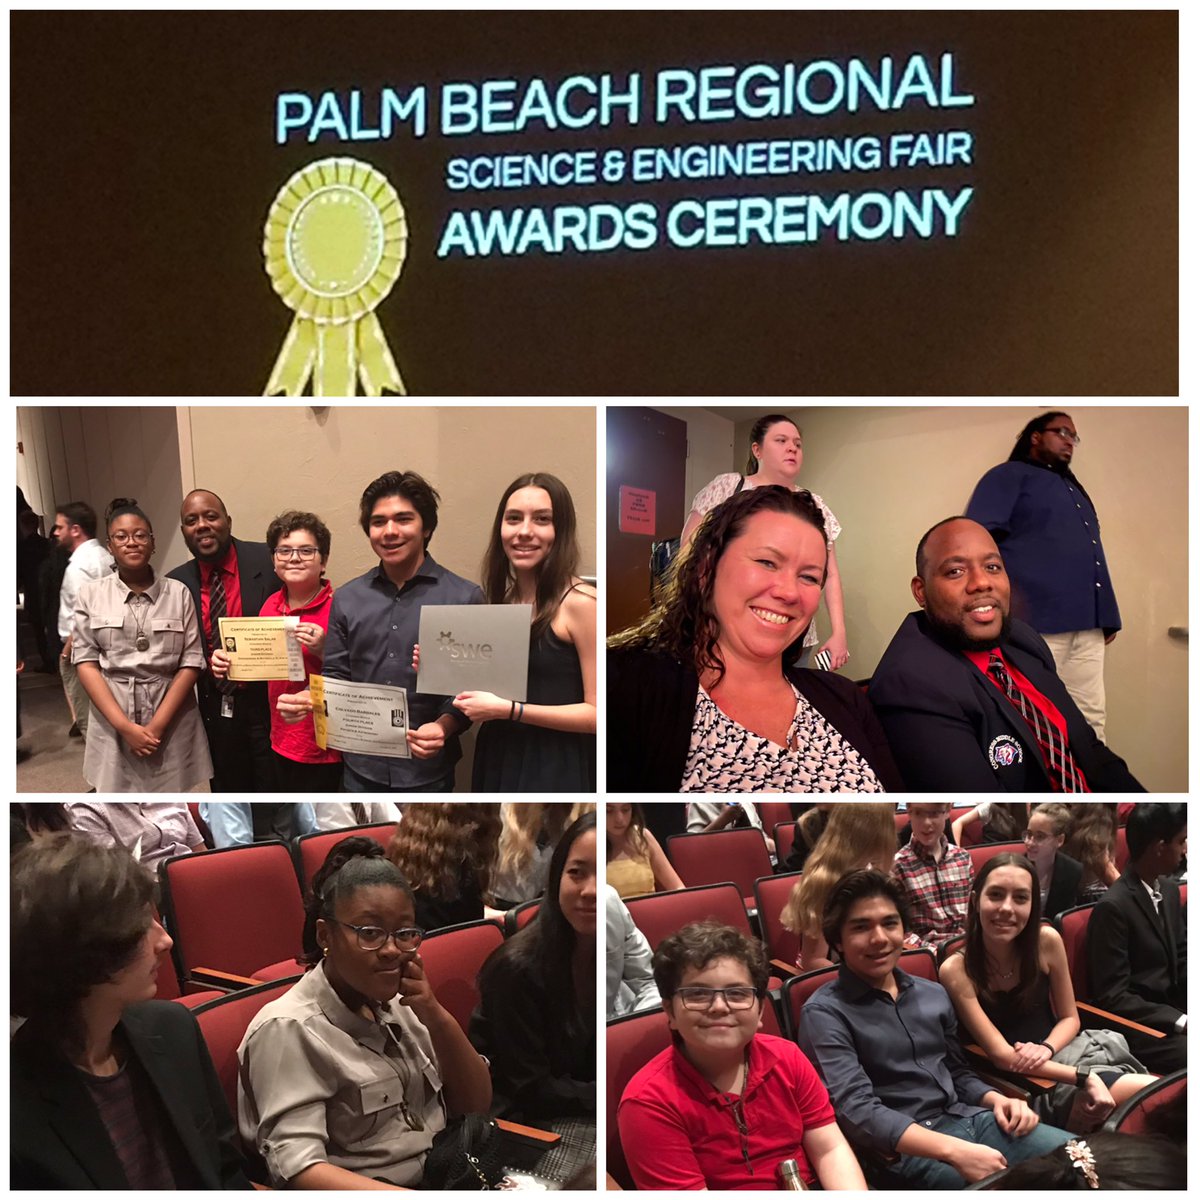 So Proud of our @CongressMS babies who won special awards & place awards @PBCSDScience Regional science fair award ceremony @LEAD4ALL @JZ_Science #engineers #girlsinstem #winning #Hardwork #educationmatters